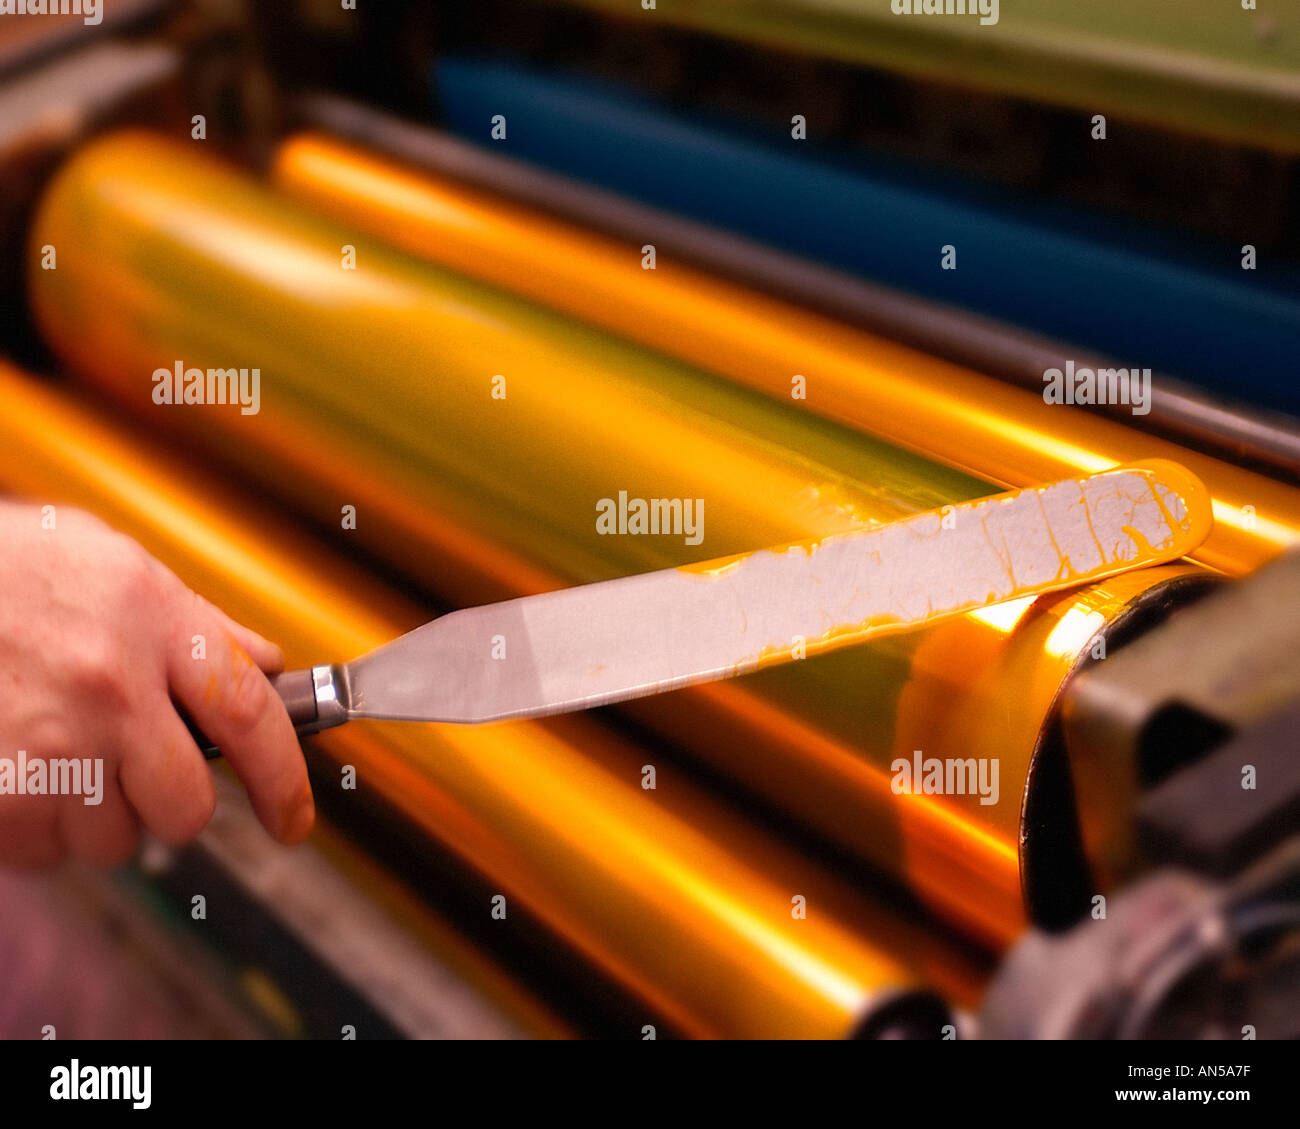 PRINTER APPLYING INK TO ROLLERS OF PRINTING PRESS Stock Photo